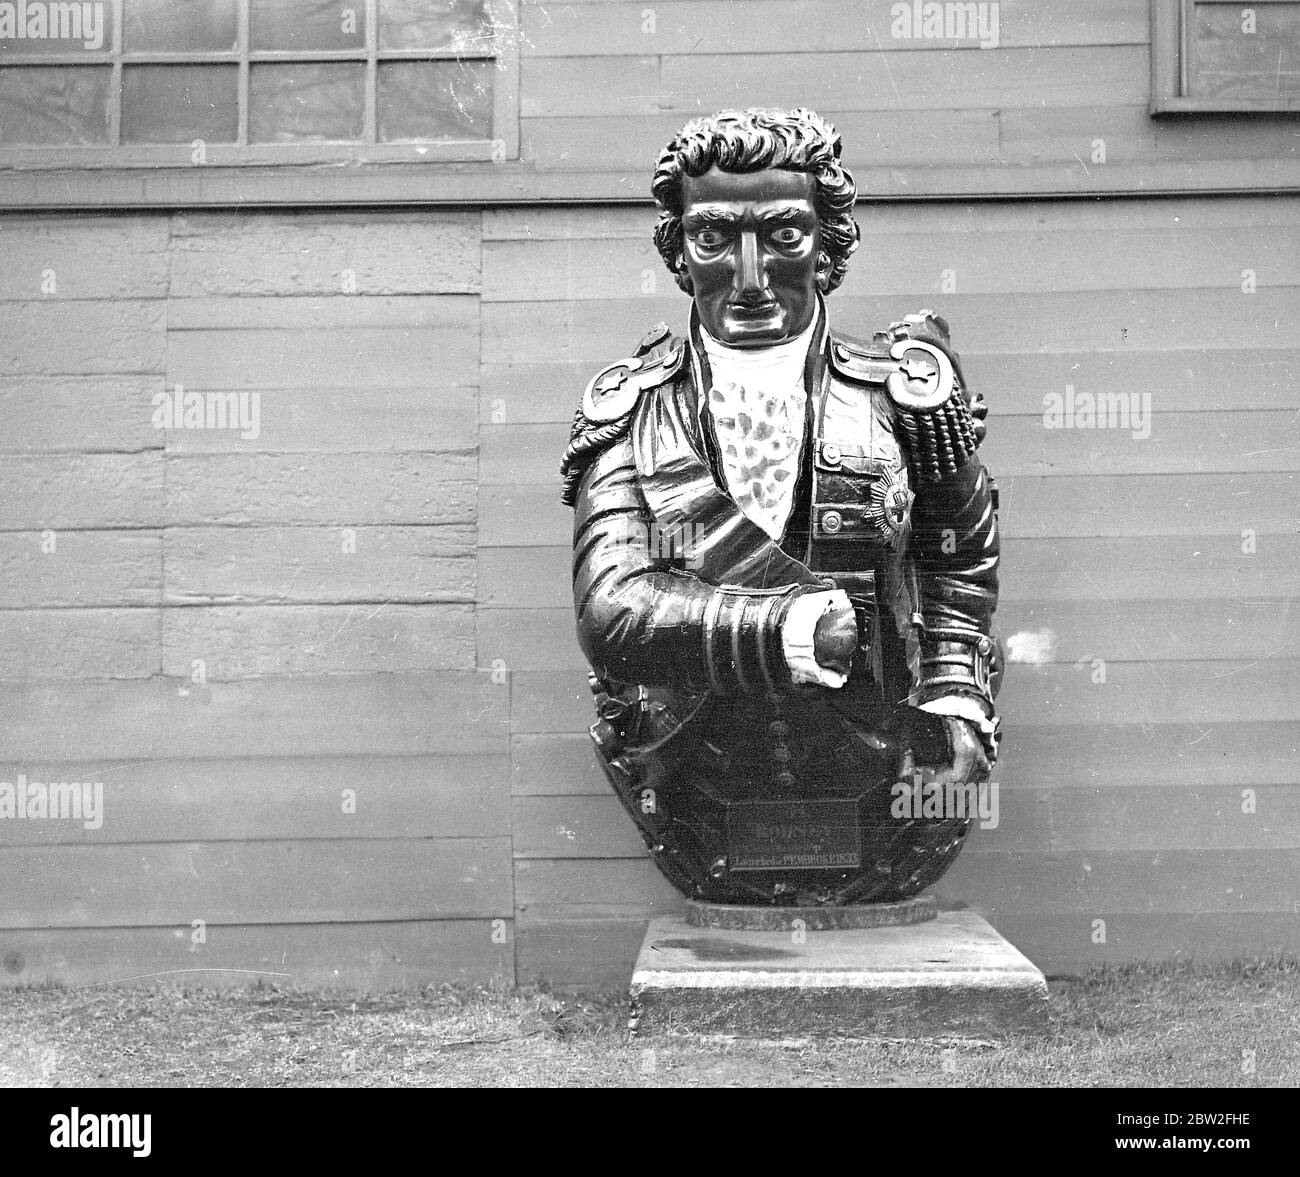 Figure Head in uniform from H.M.S Rodney. Seven feet foot and three inches (7' 3). Launched at Pembroke in 1833. The figure was removed because it was repeatedly damaged at sea. The missing hand was carried away by a heavy sea. Photographed at Admiral's Walk, Chatham, Kent. Stock Photo